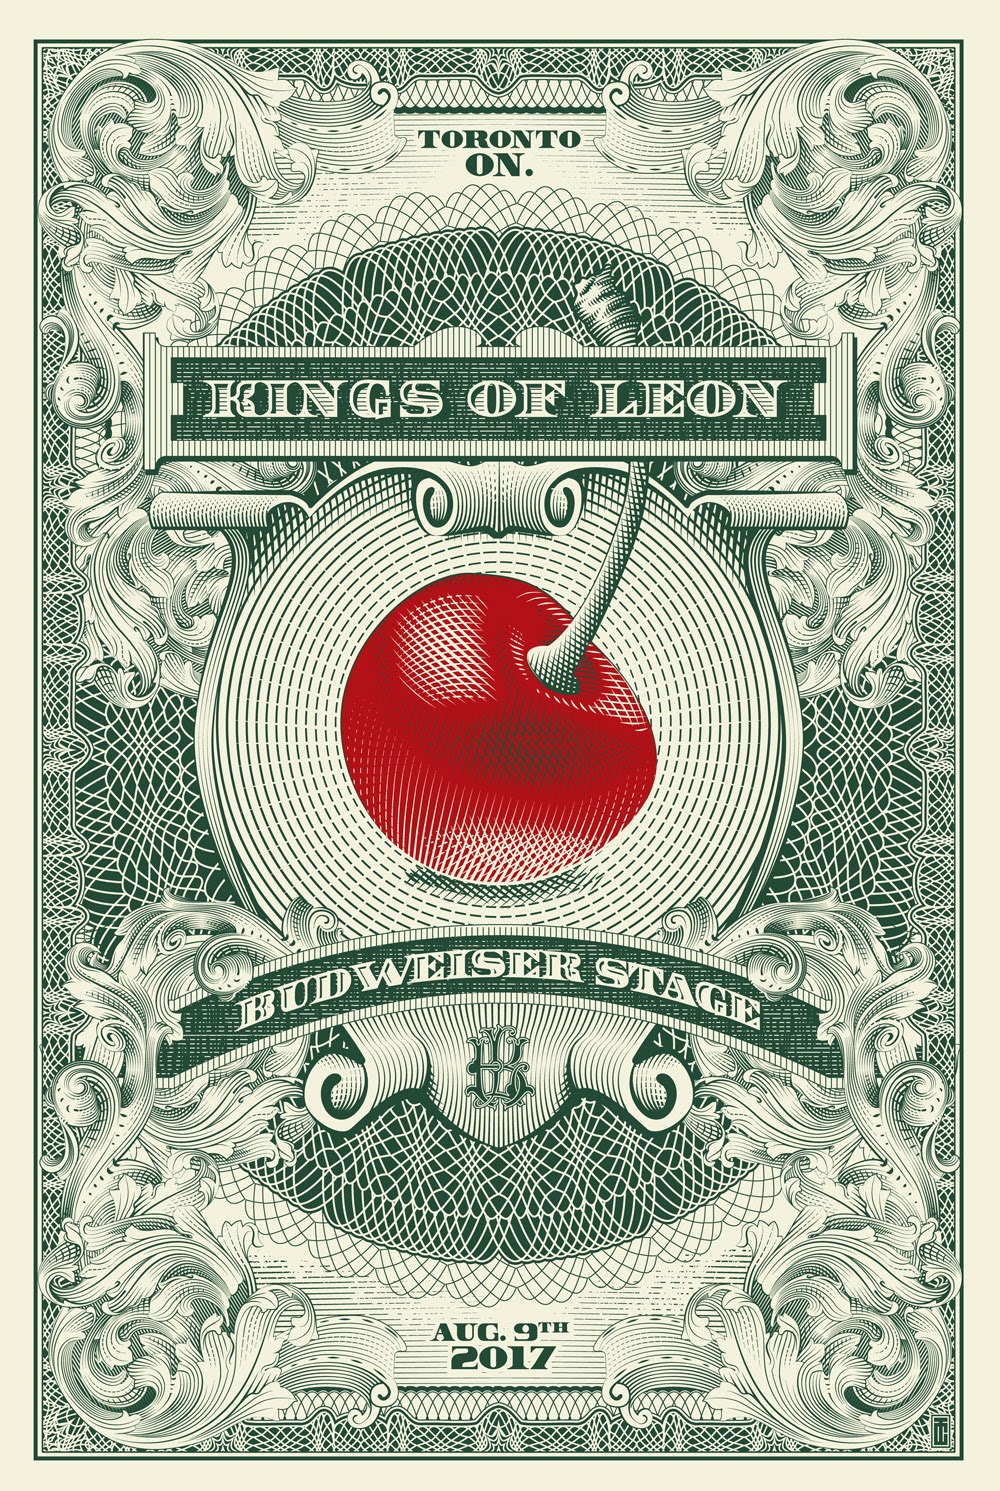 poster design portrait illustration kingsofleon by tracie ching